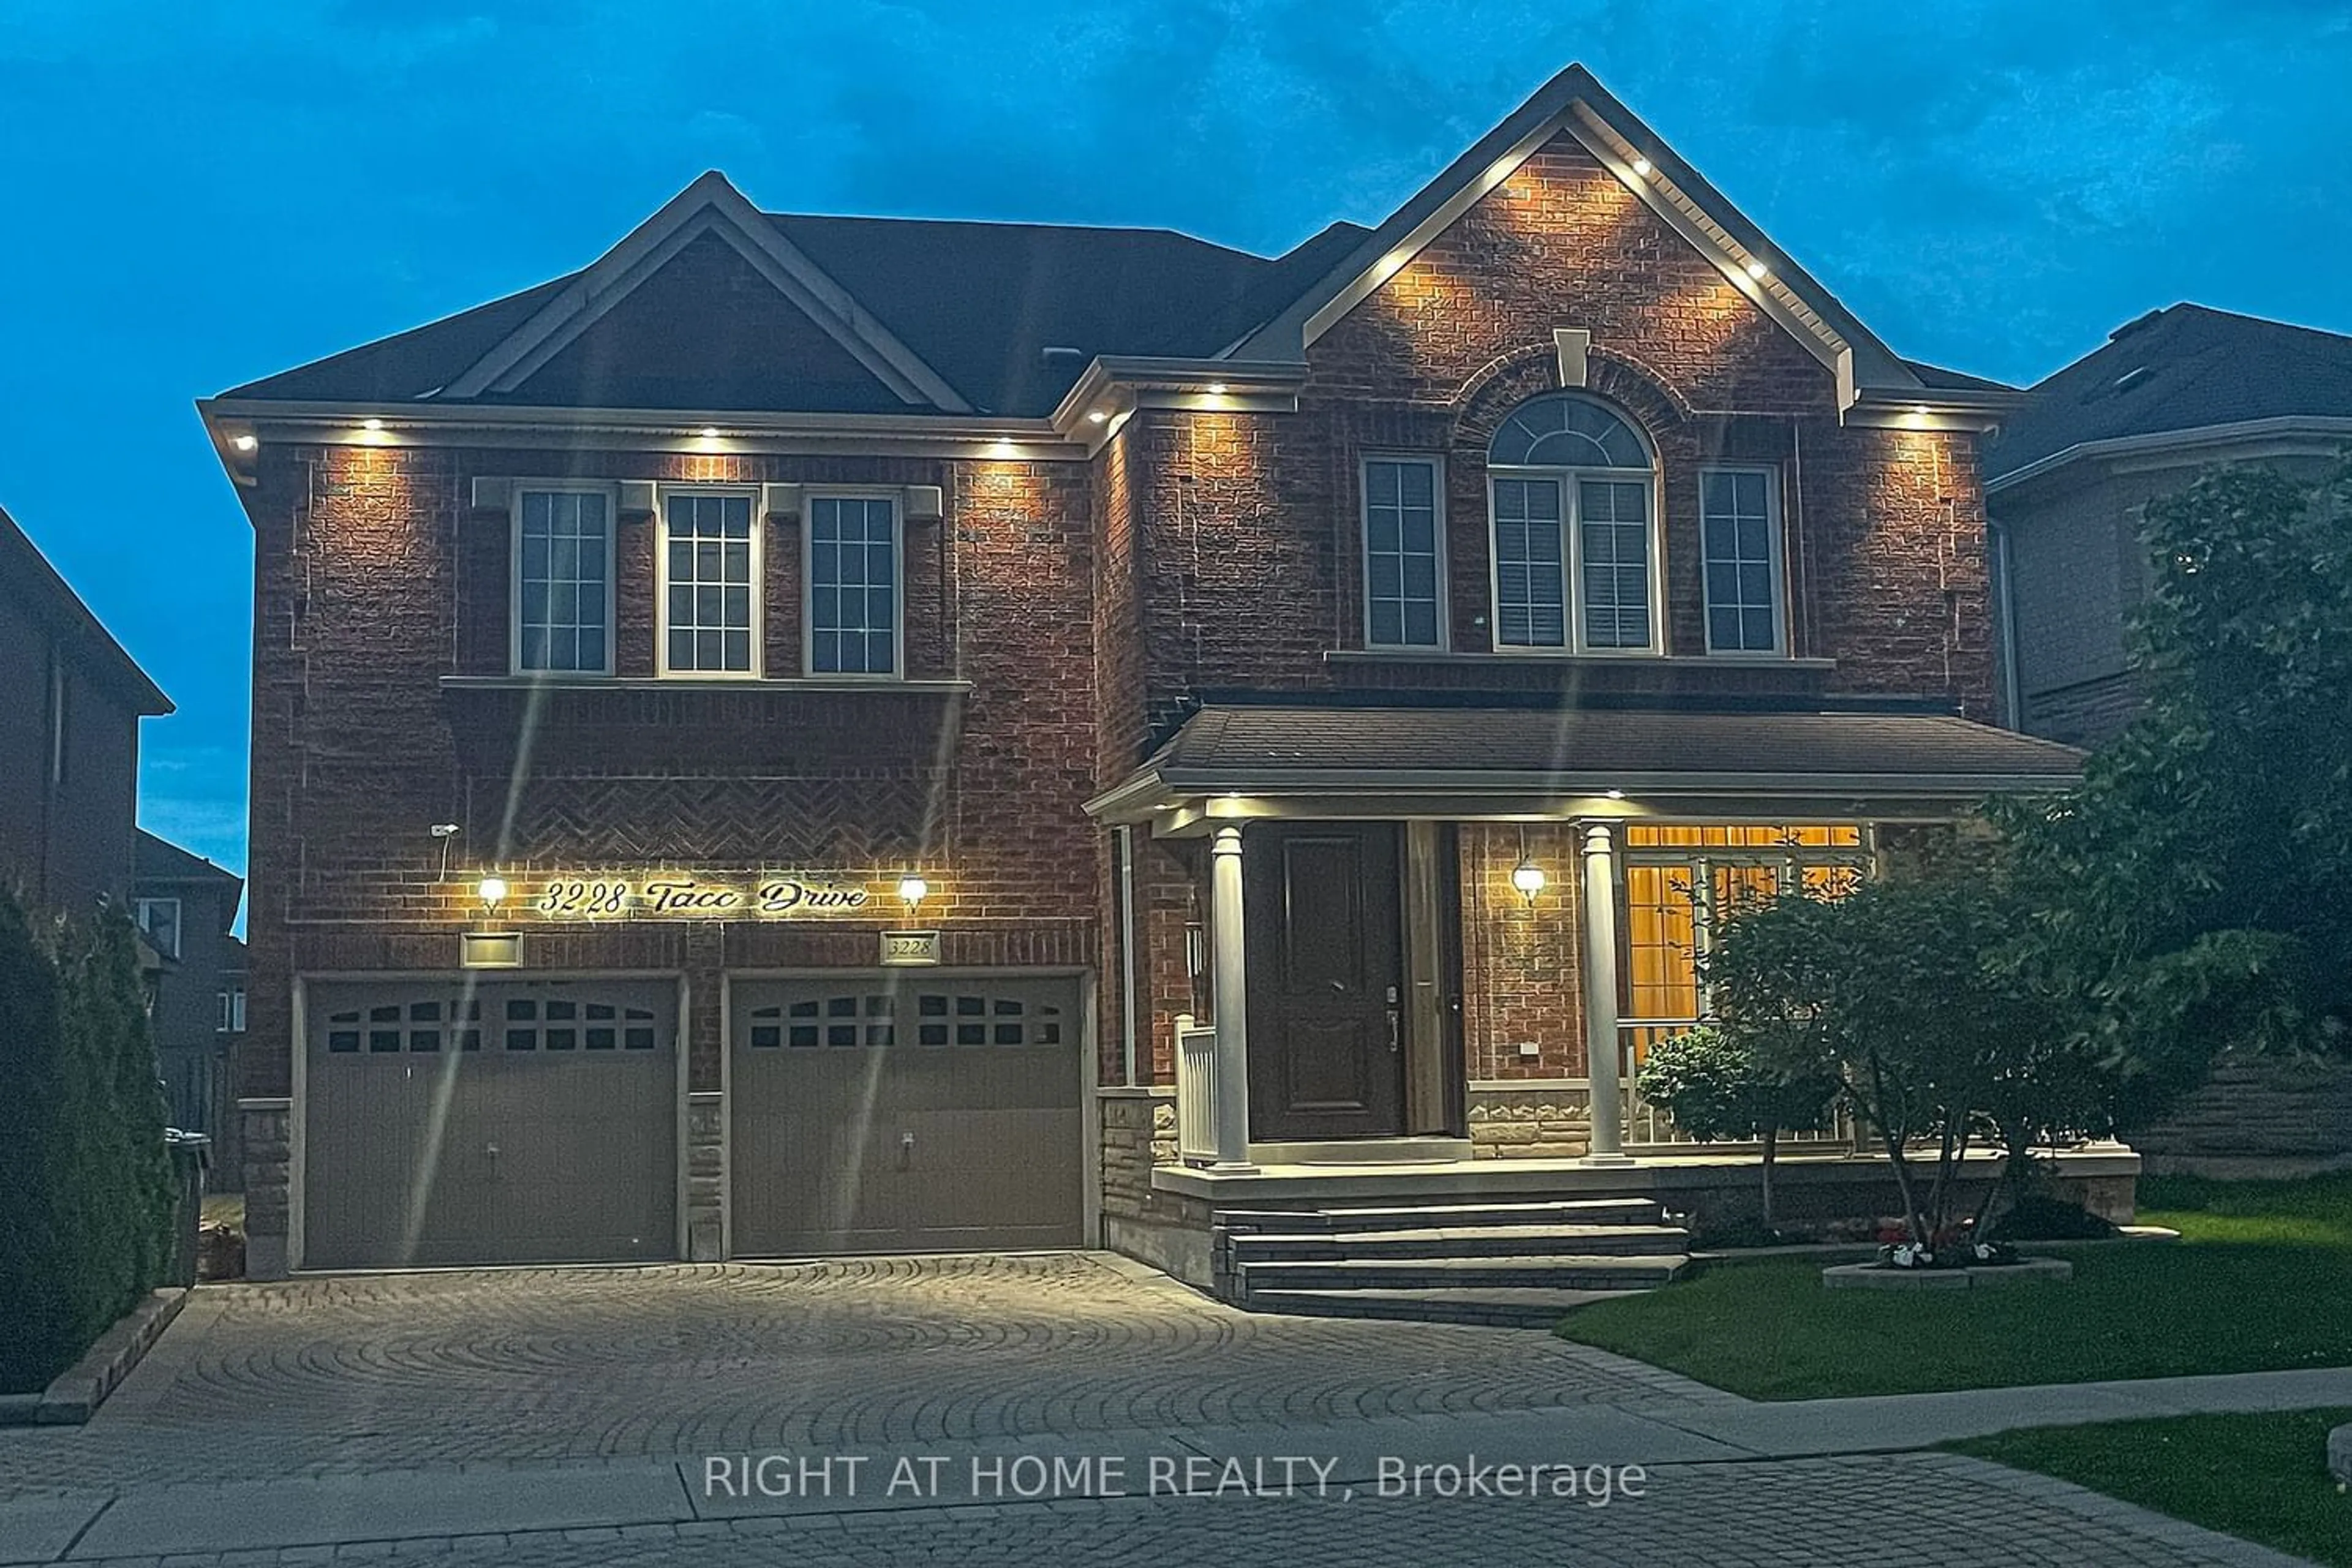 Home with brick exterior material for 3228 Tacc Dr, Mississauga Ontario L5M 0H3